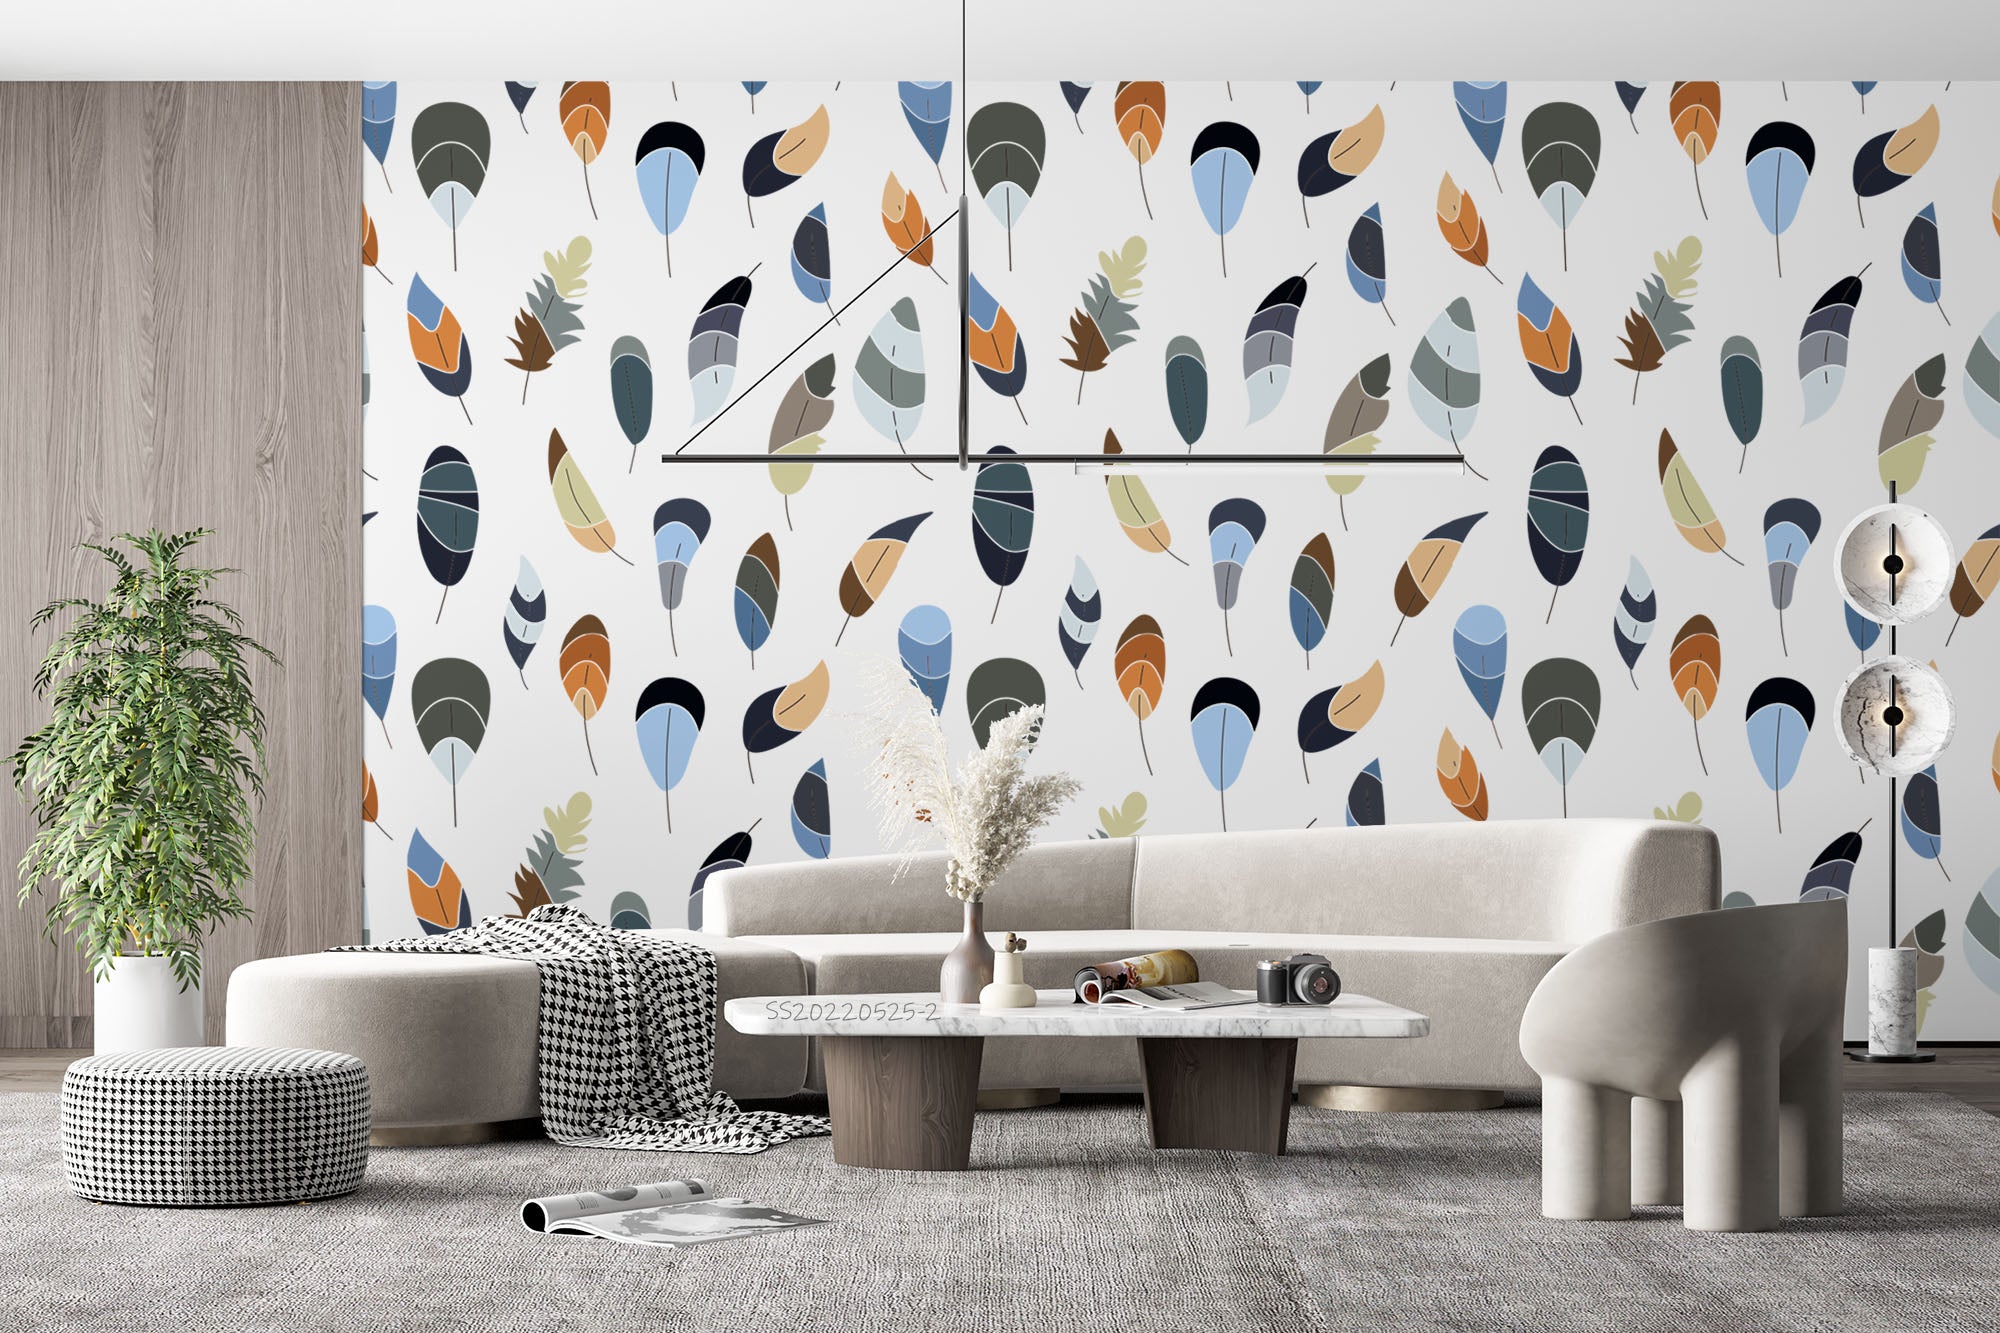 3D Vintage Abstract Feather Pattern Wall Mural Wallpaper GD 122- Jess Art Decoration